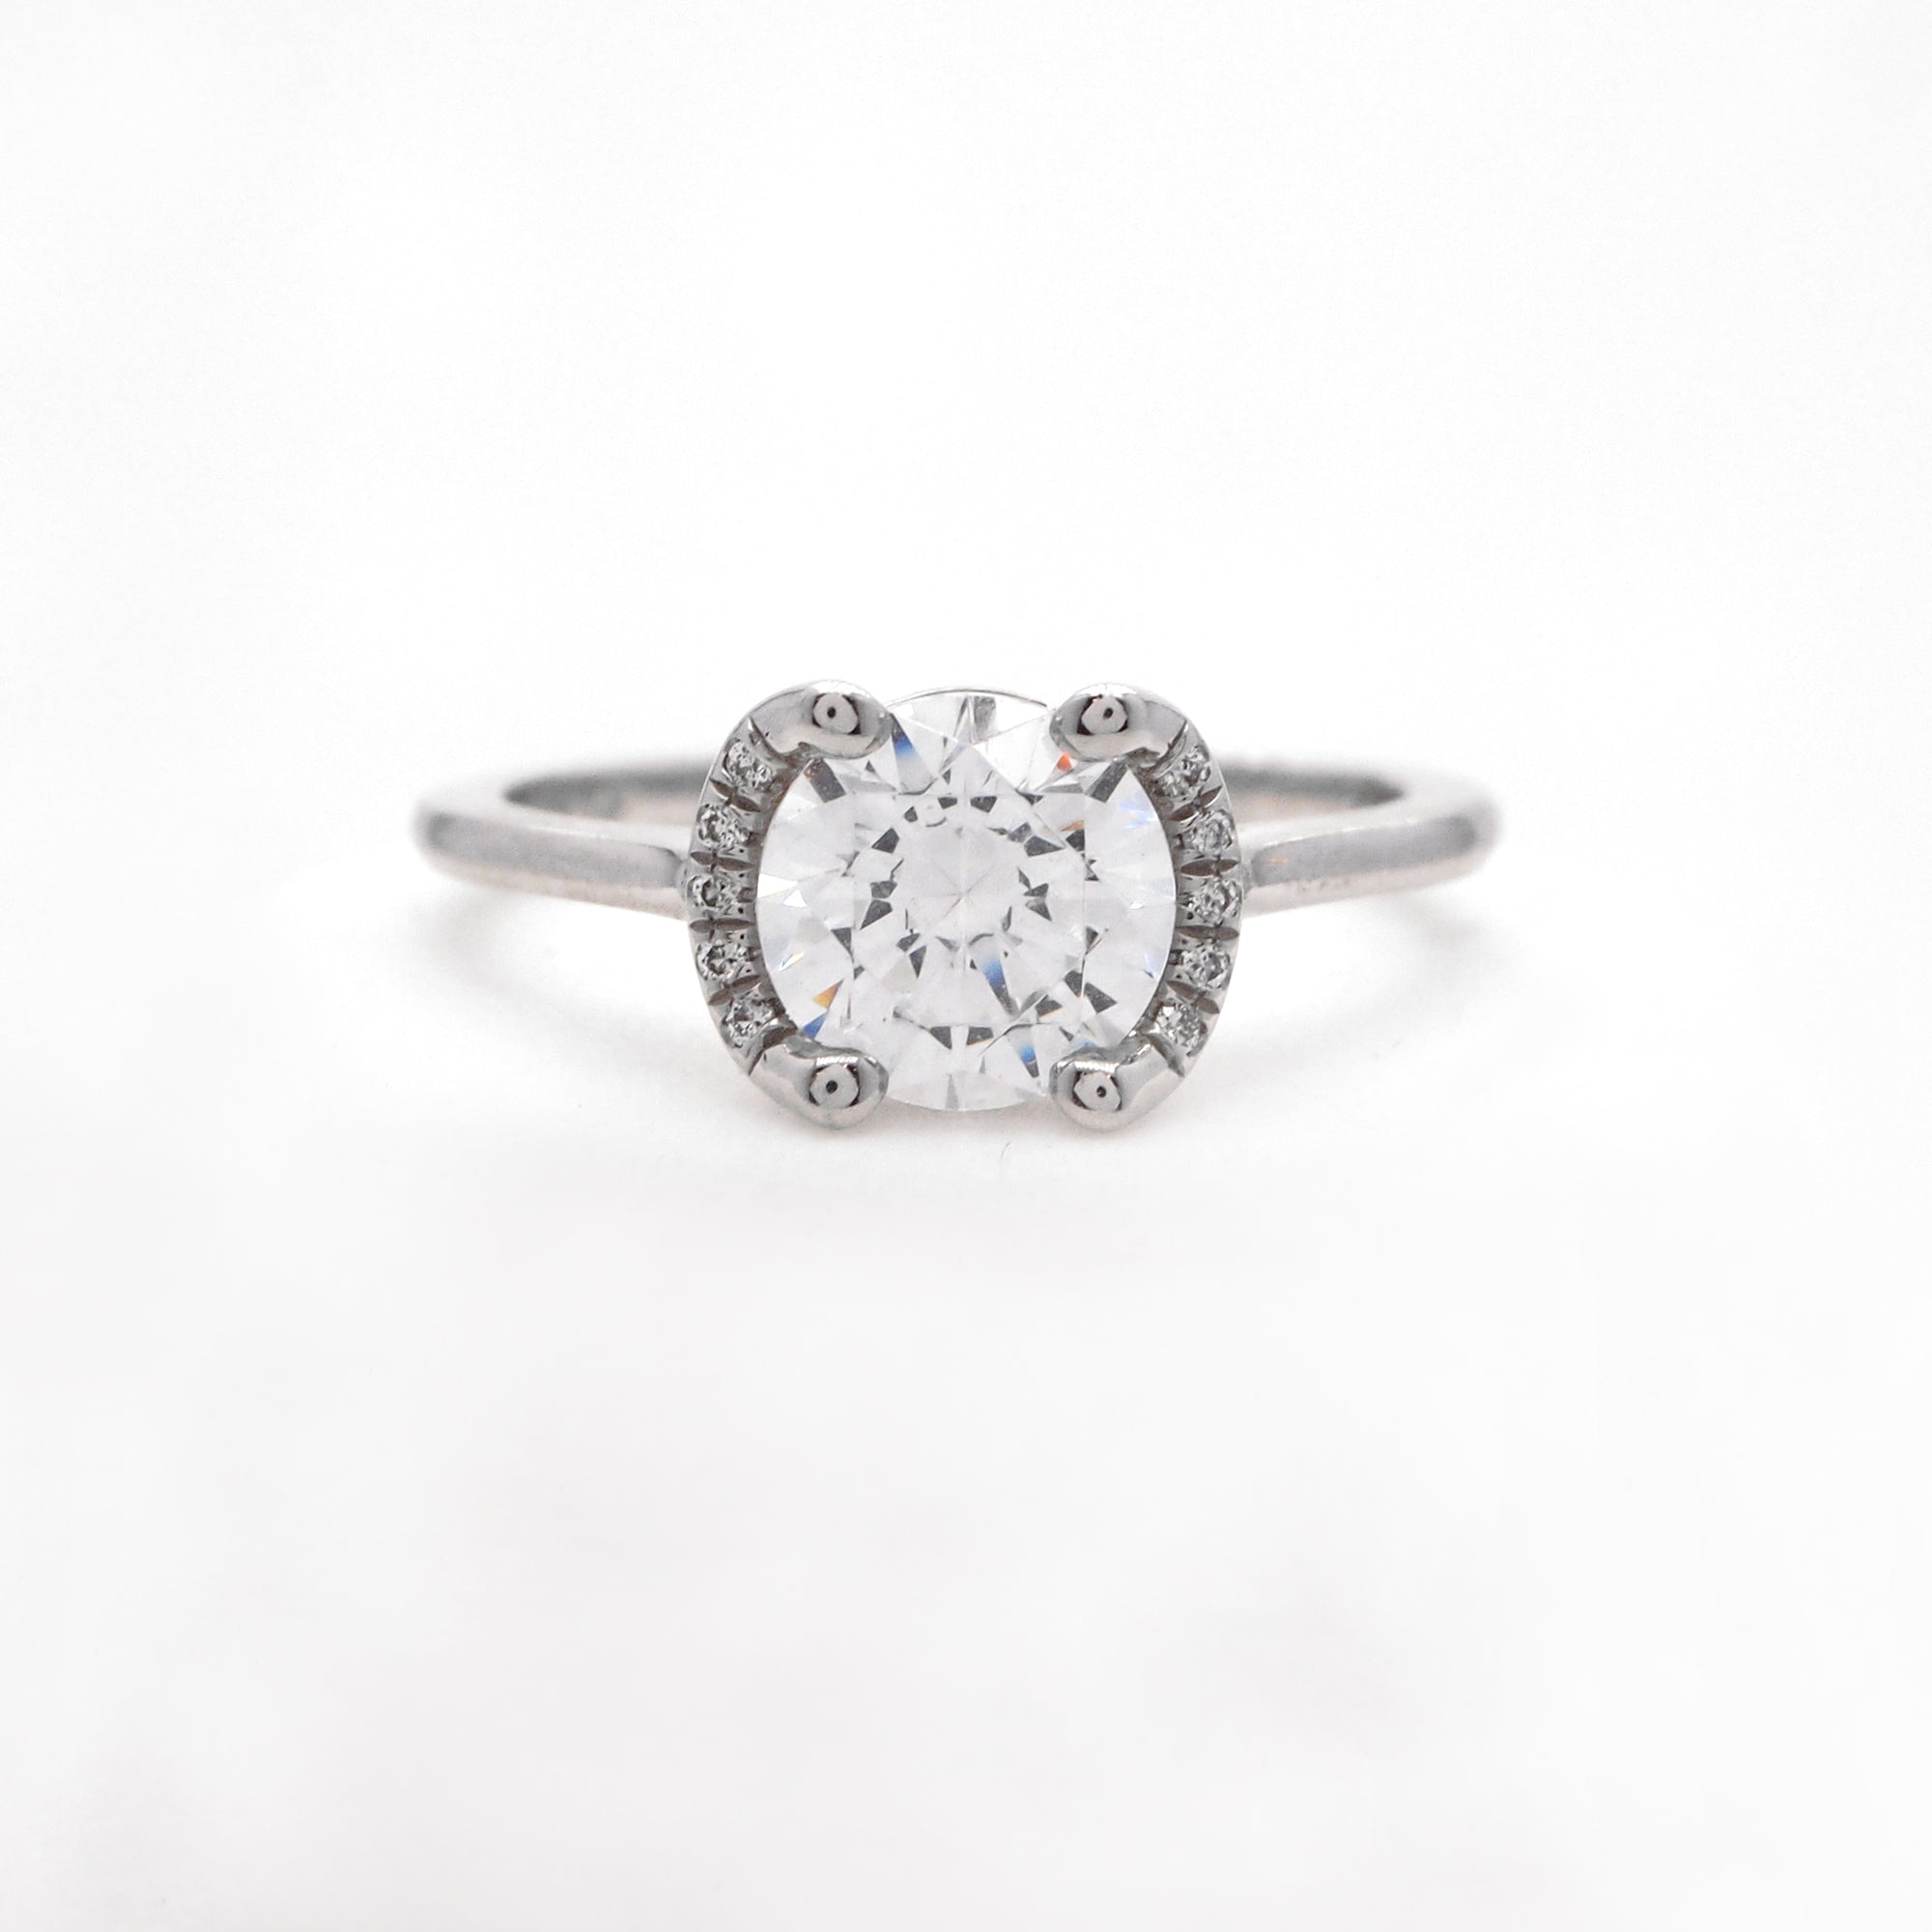 Platinum engagement ring featuring a crescent halo with round brilliant diamonds weighing a total of 0.04 carats. This